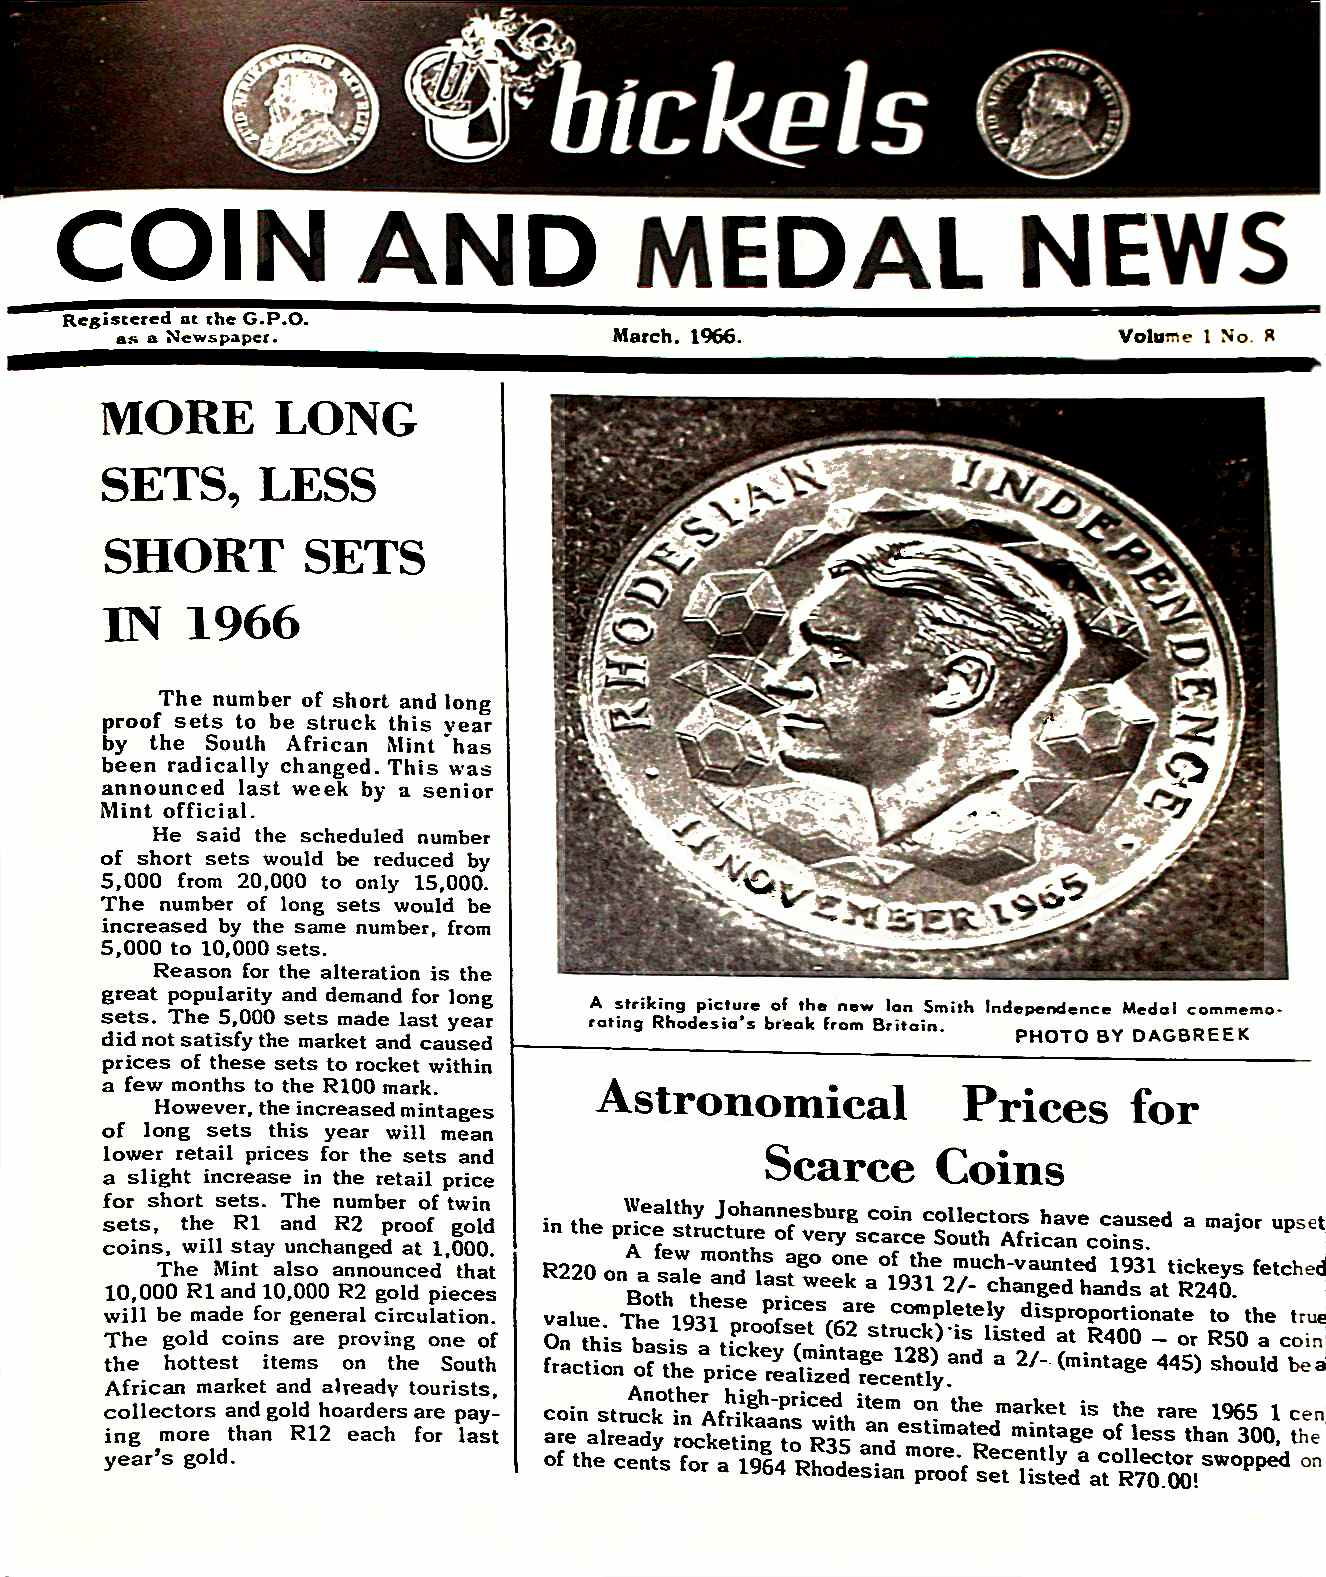 Bickels Coin & Medal News March 1966 Vol 1 No 8